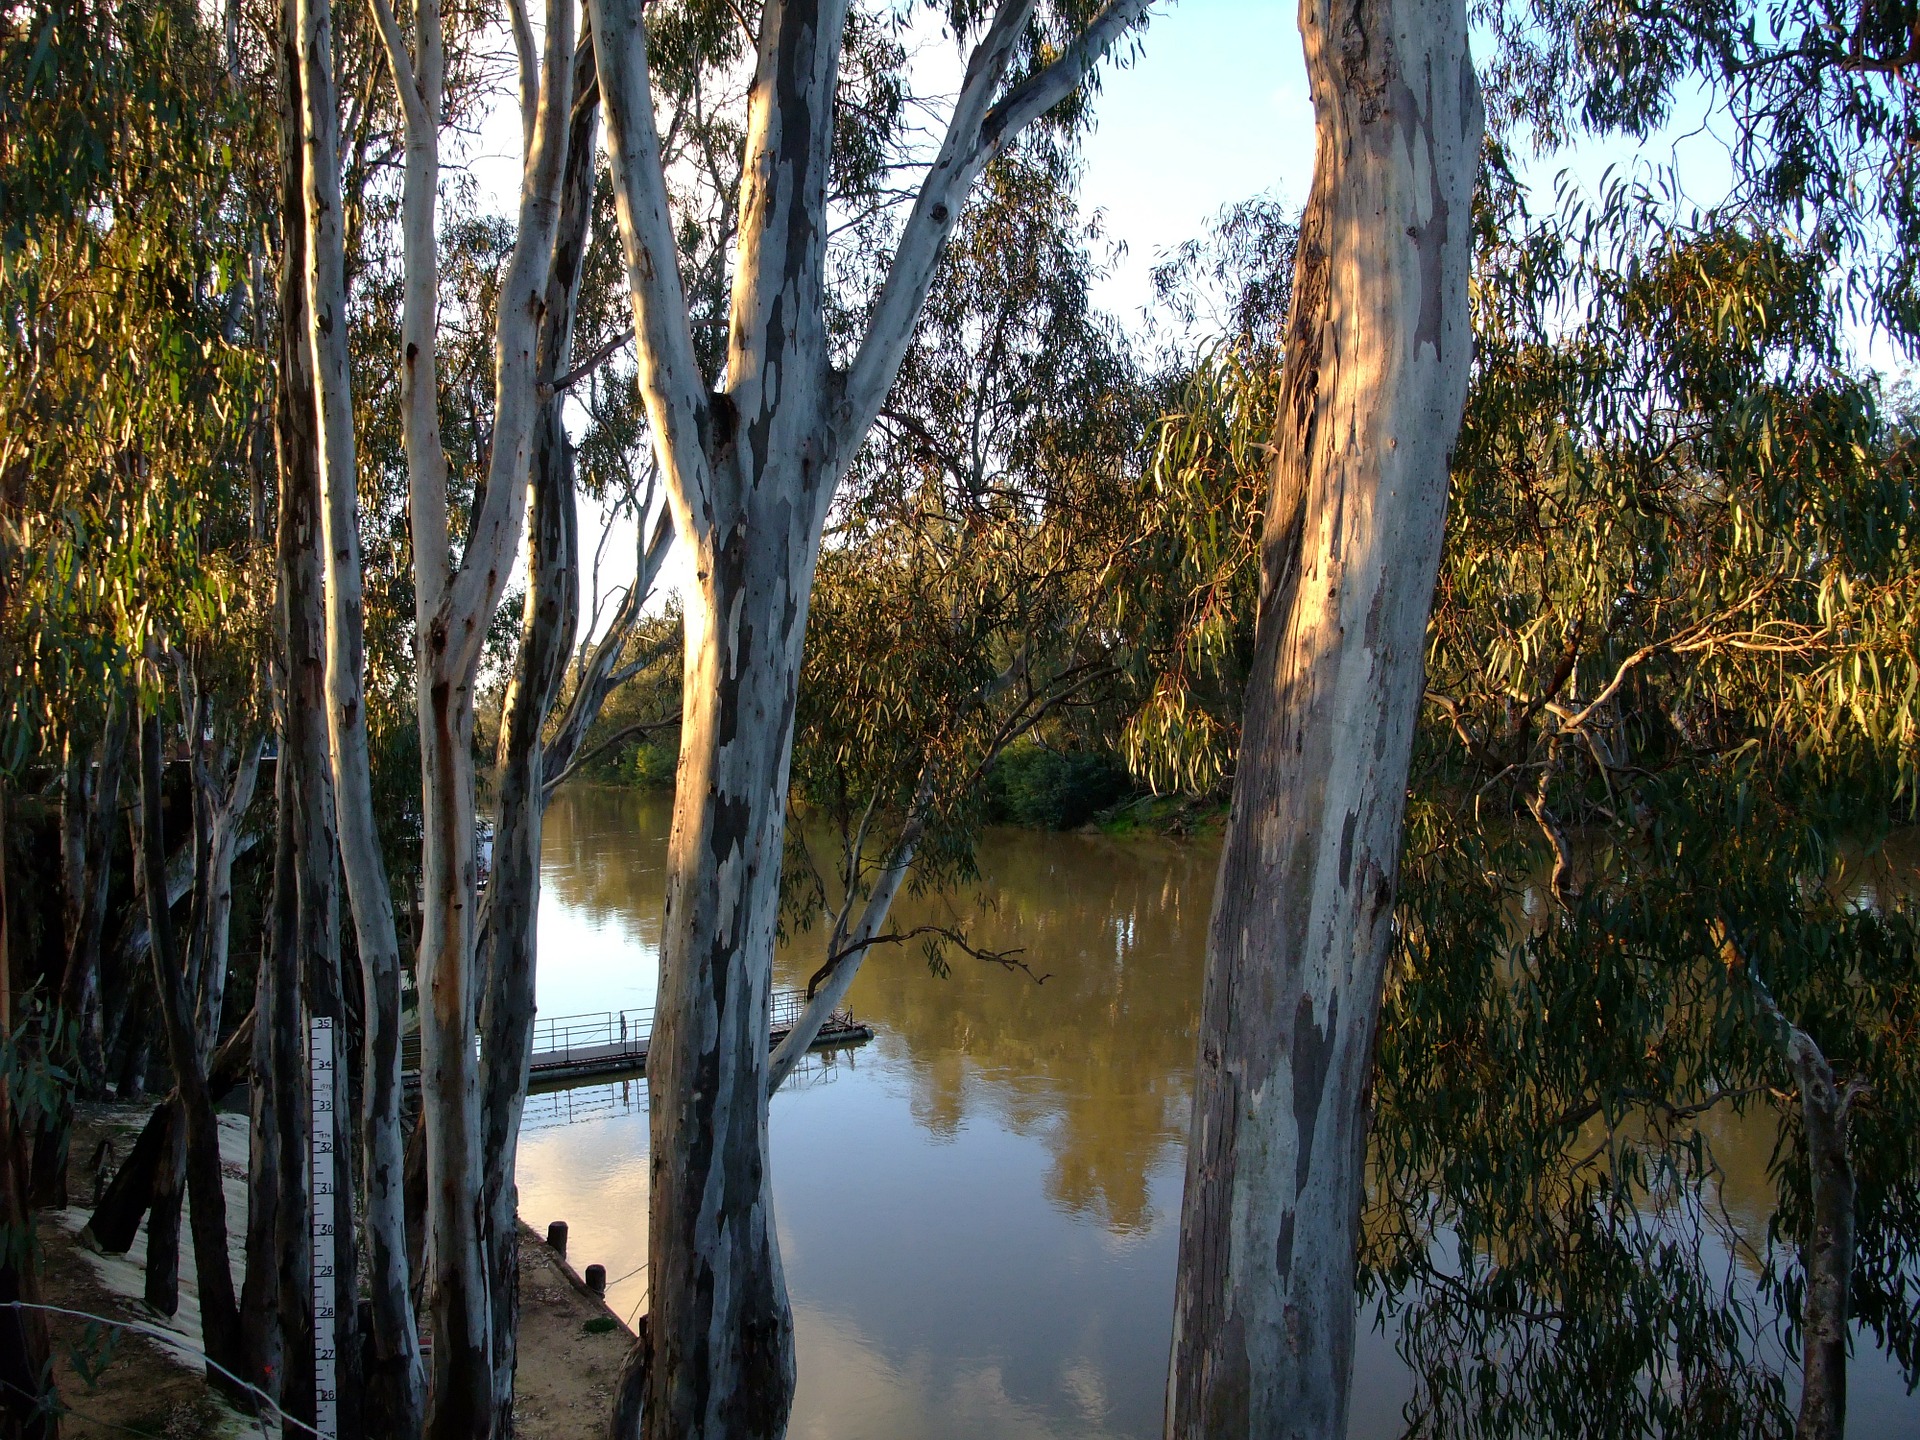 An image of a river lined with gum trees.